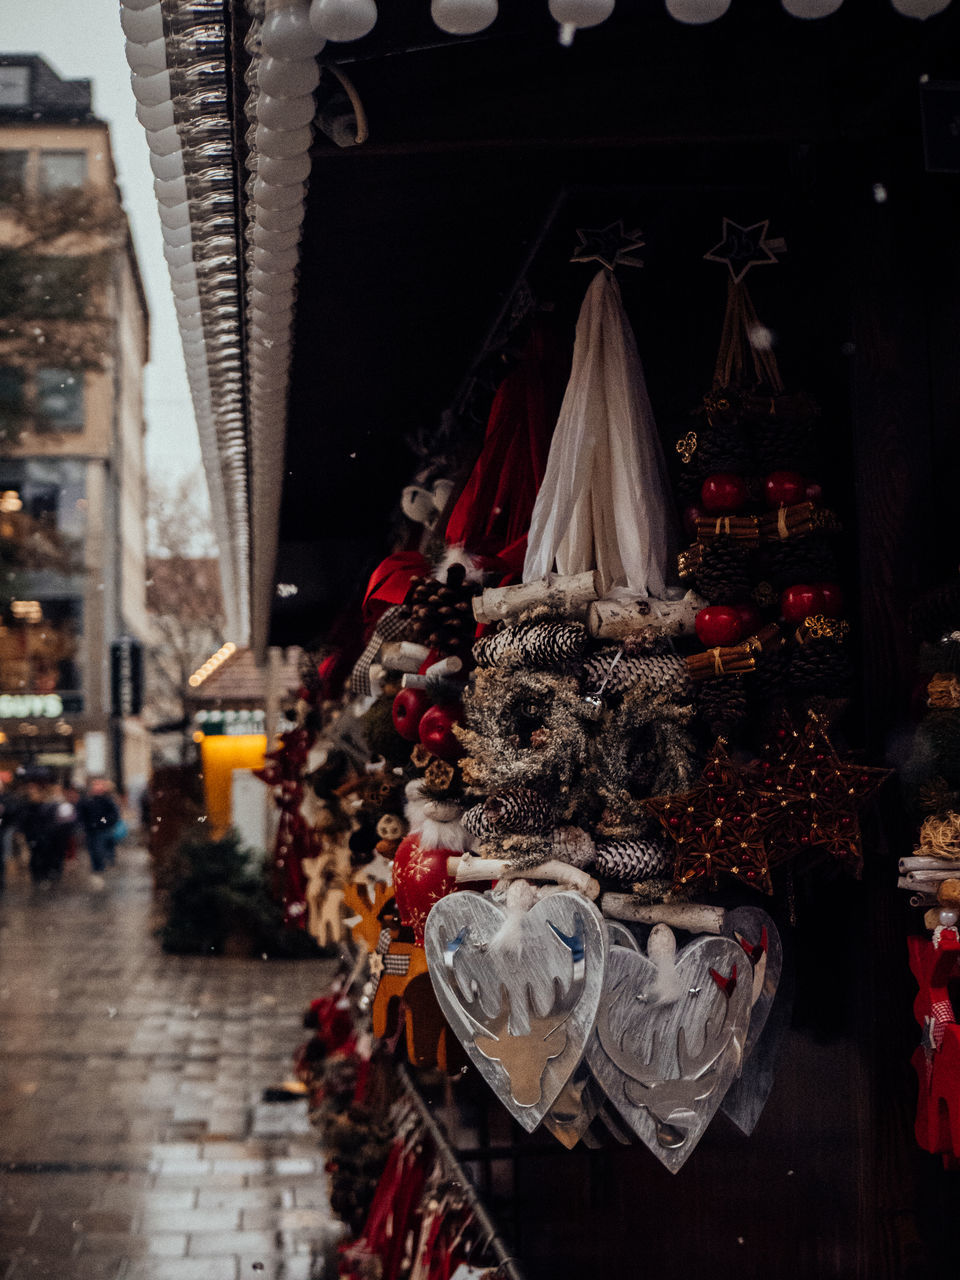 architecture, city, celebration, hanging, decoration, tradition, holiday, christmas, built structure, market, retail, street, christmas decoration, building exterior, travel destinations, outdoors, no people, religion, night